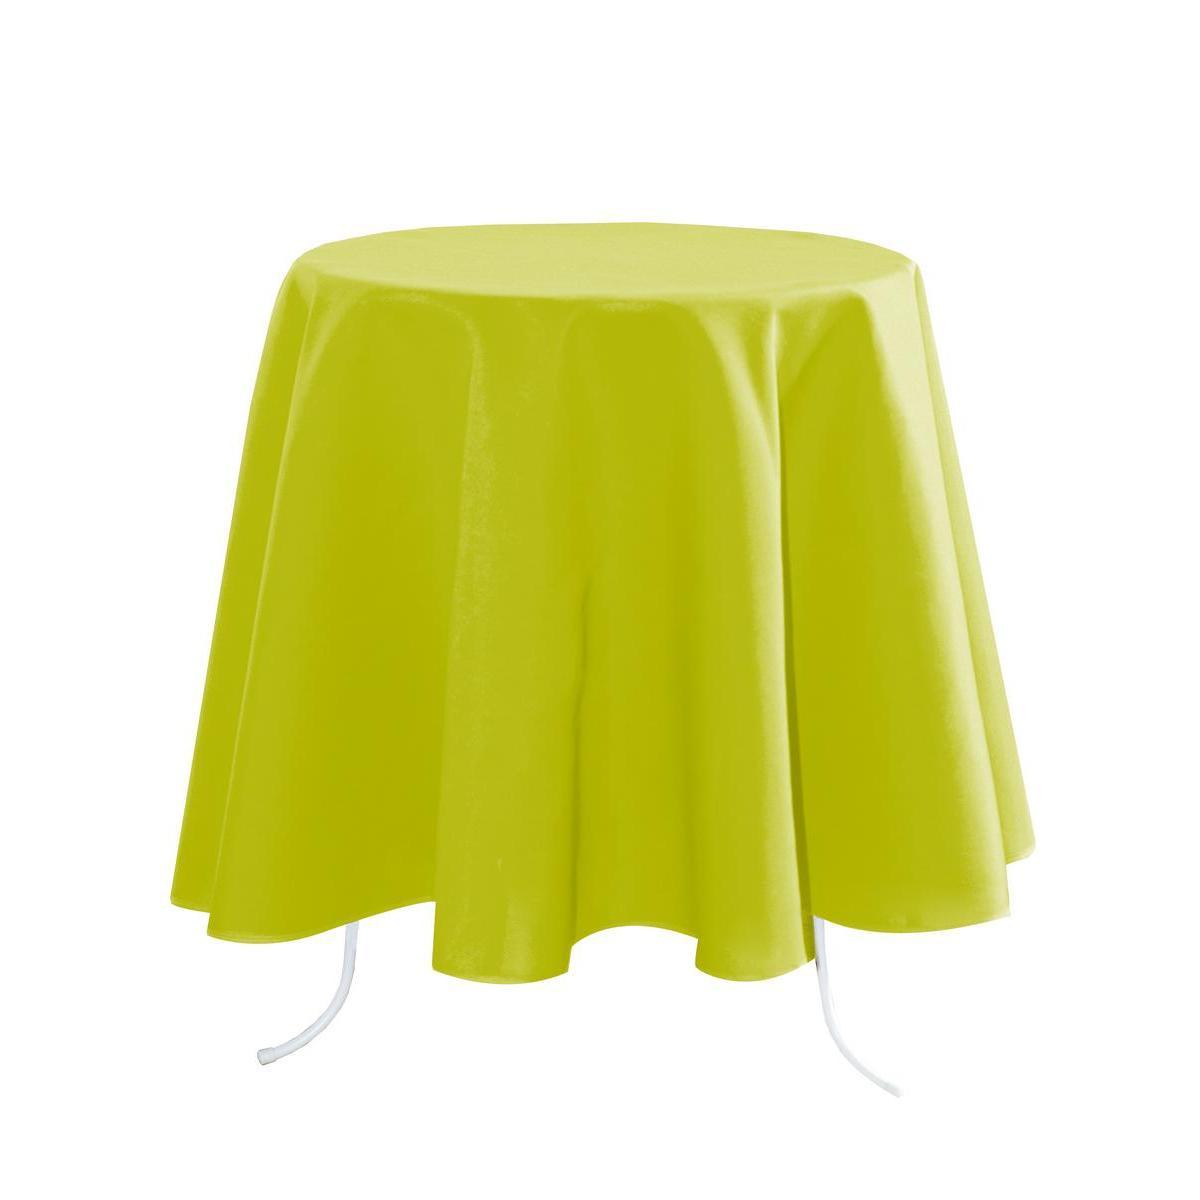 Nappe rectangulaire - 100 % Polyester - 148 x 300 cm - Vert anis